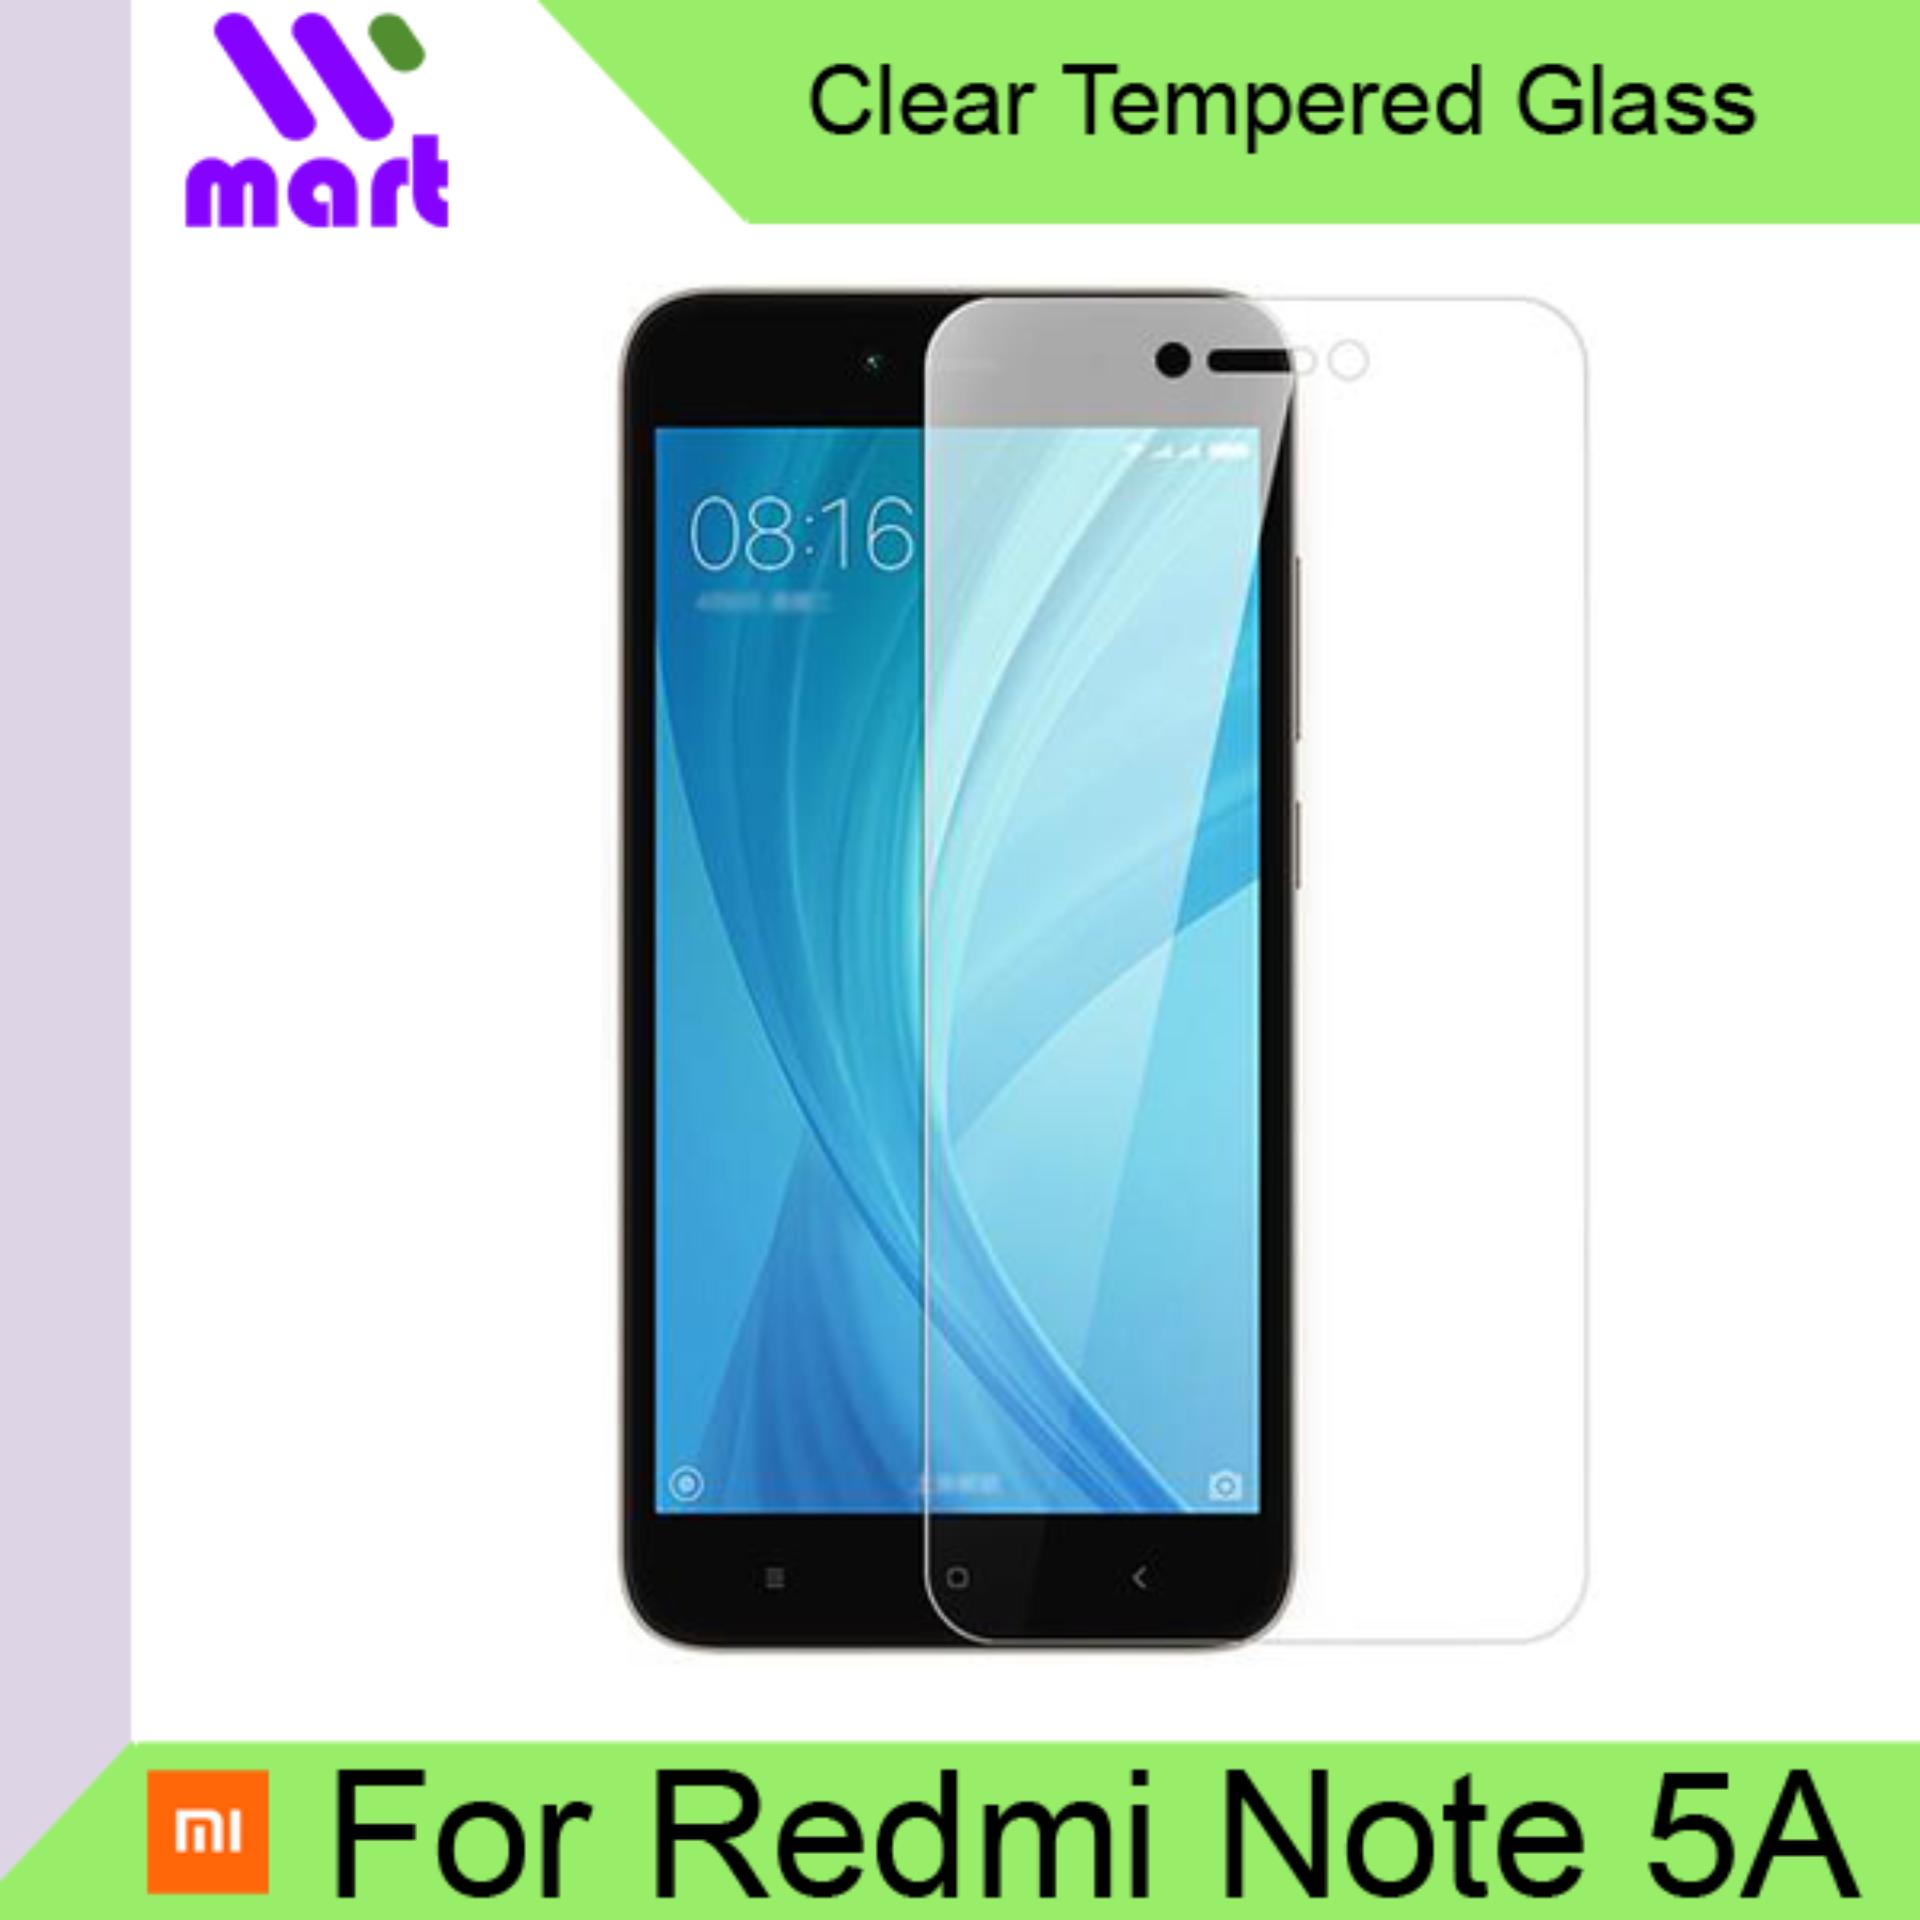 Tempered Glass Screen Protector (Clear) For Xiaomi Redmi Note 5A